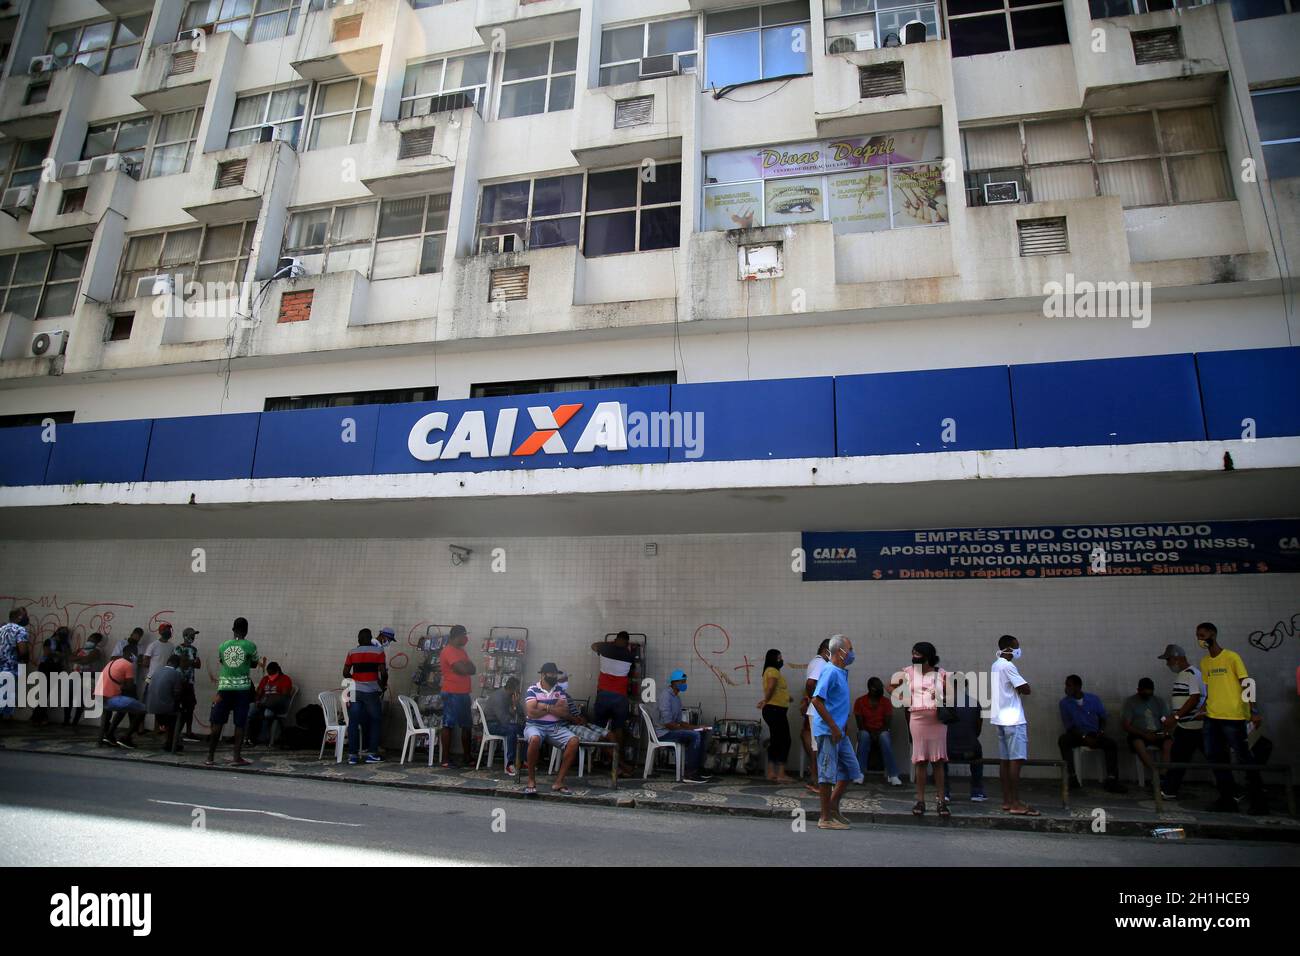 salvador, bahia / brazil - september 8, 2020: people face queues for assistance at Caixa Economica Federal in the neighborhood of Comercio, in the cit Stock Photo